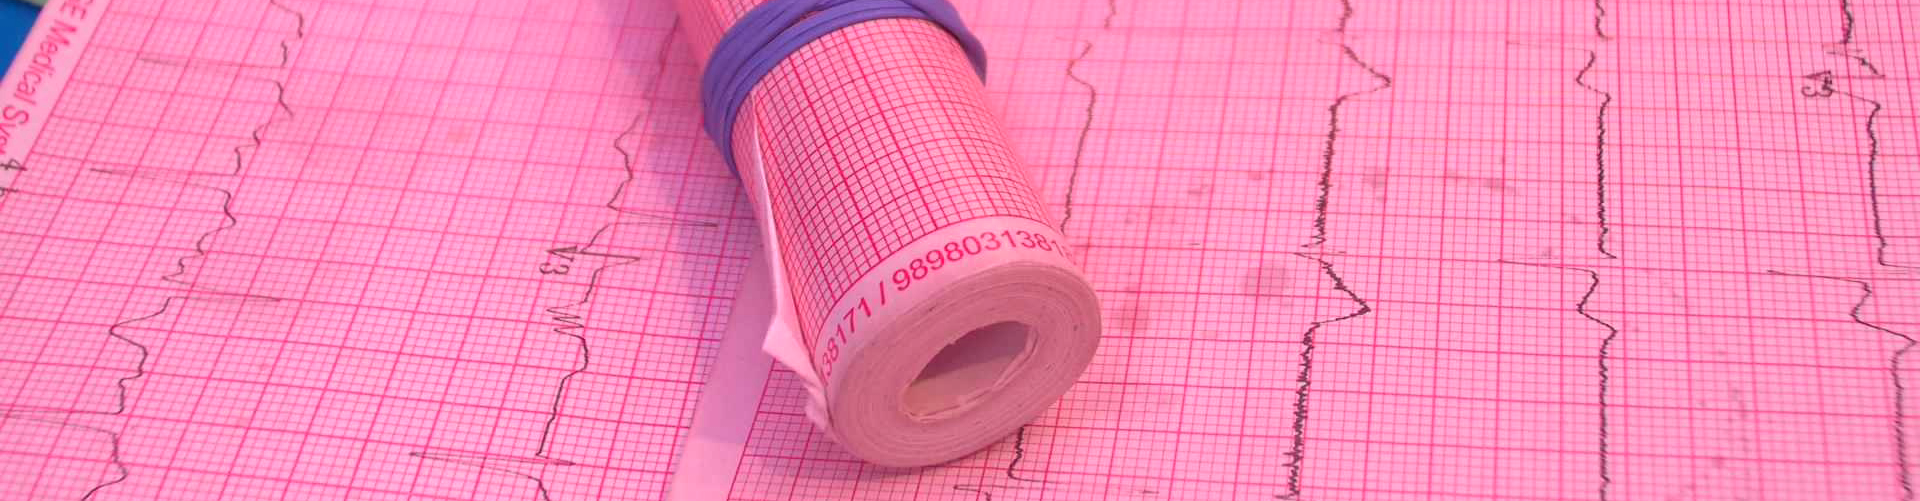 Tattered roll of ECG paper on a 12 Lead.